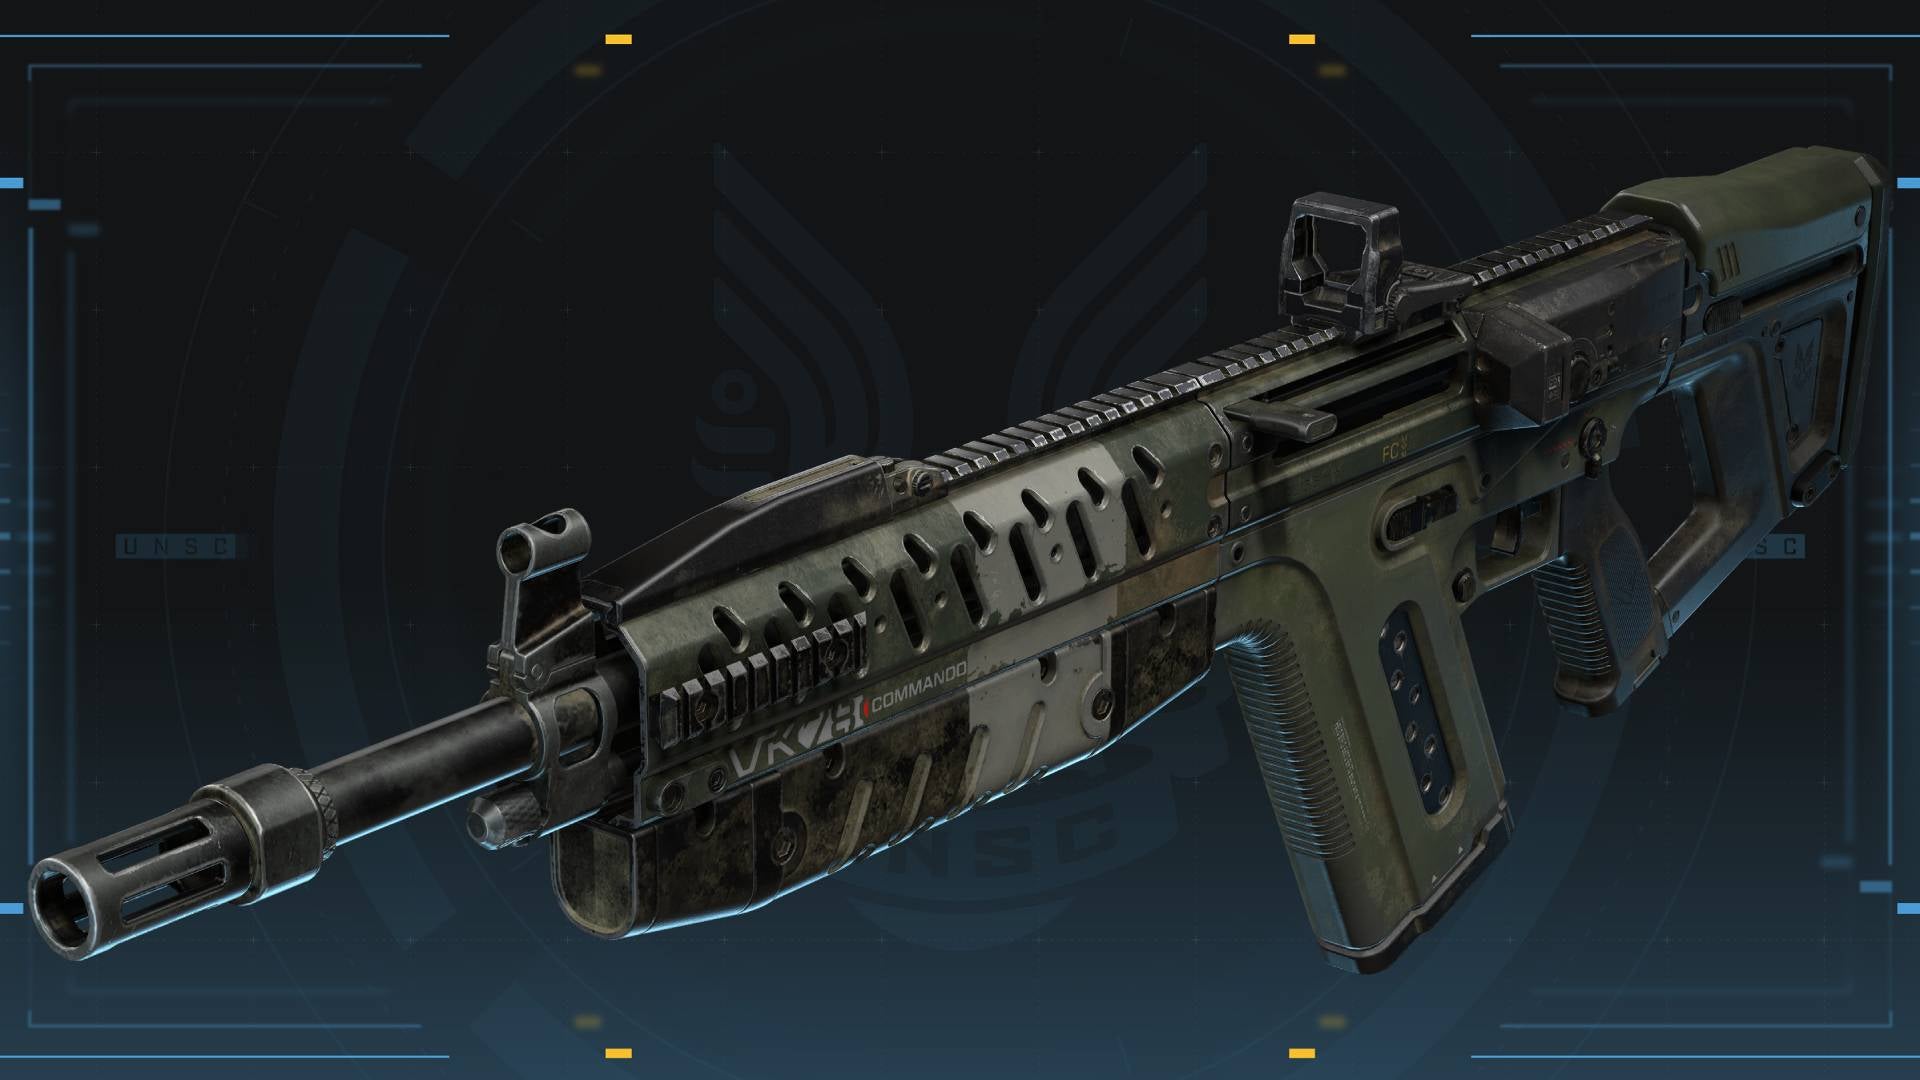 It looks like Halo 4's DMR, but the commando is fully automatic. (Image: 343 Industries)